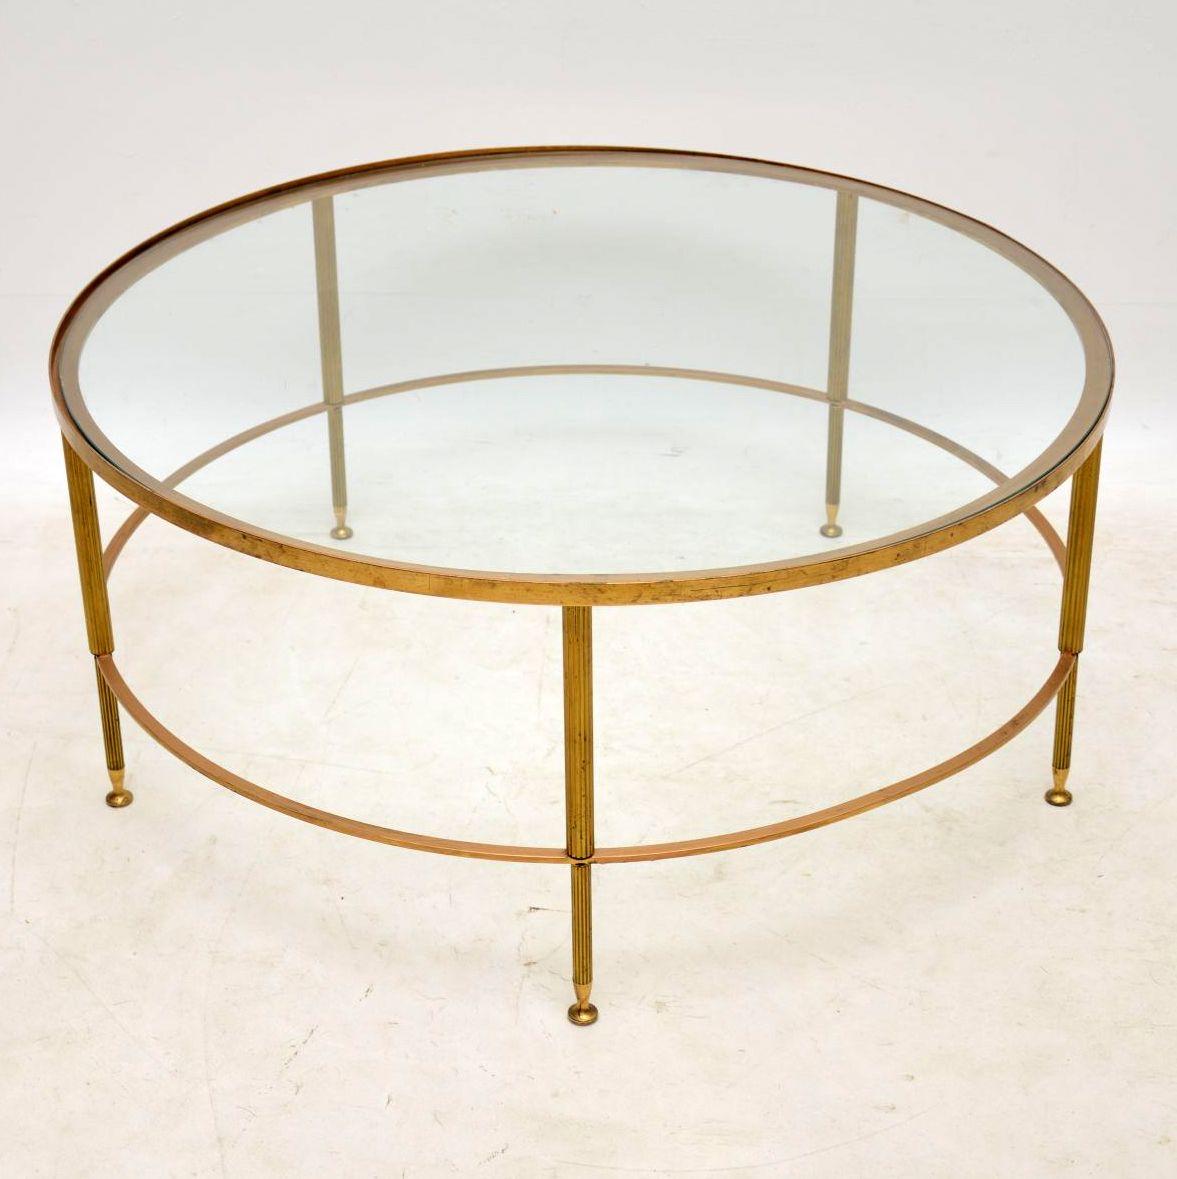 A beautiful and impressive circular brass coffee table with an inset glass top, this was made in France and dates from the 1960s. It’s very well made and in lovely vintage condition, with only some minor surface wear to be seen.

Measures: Width